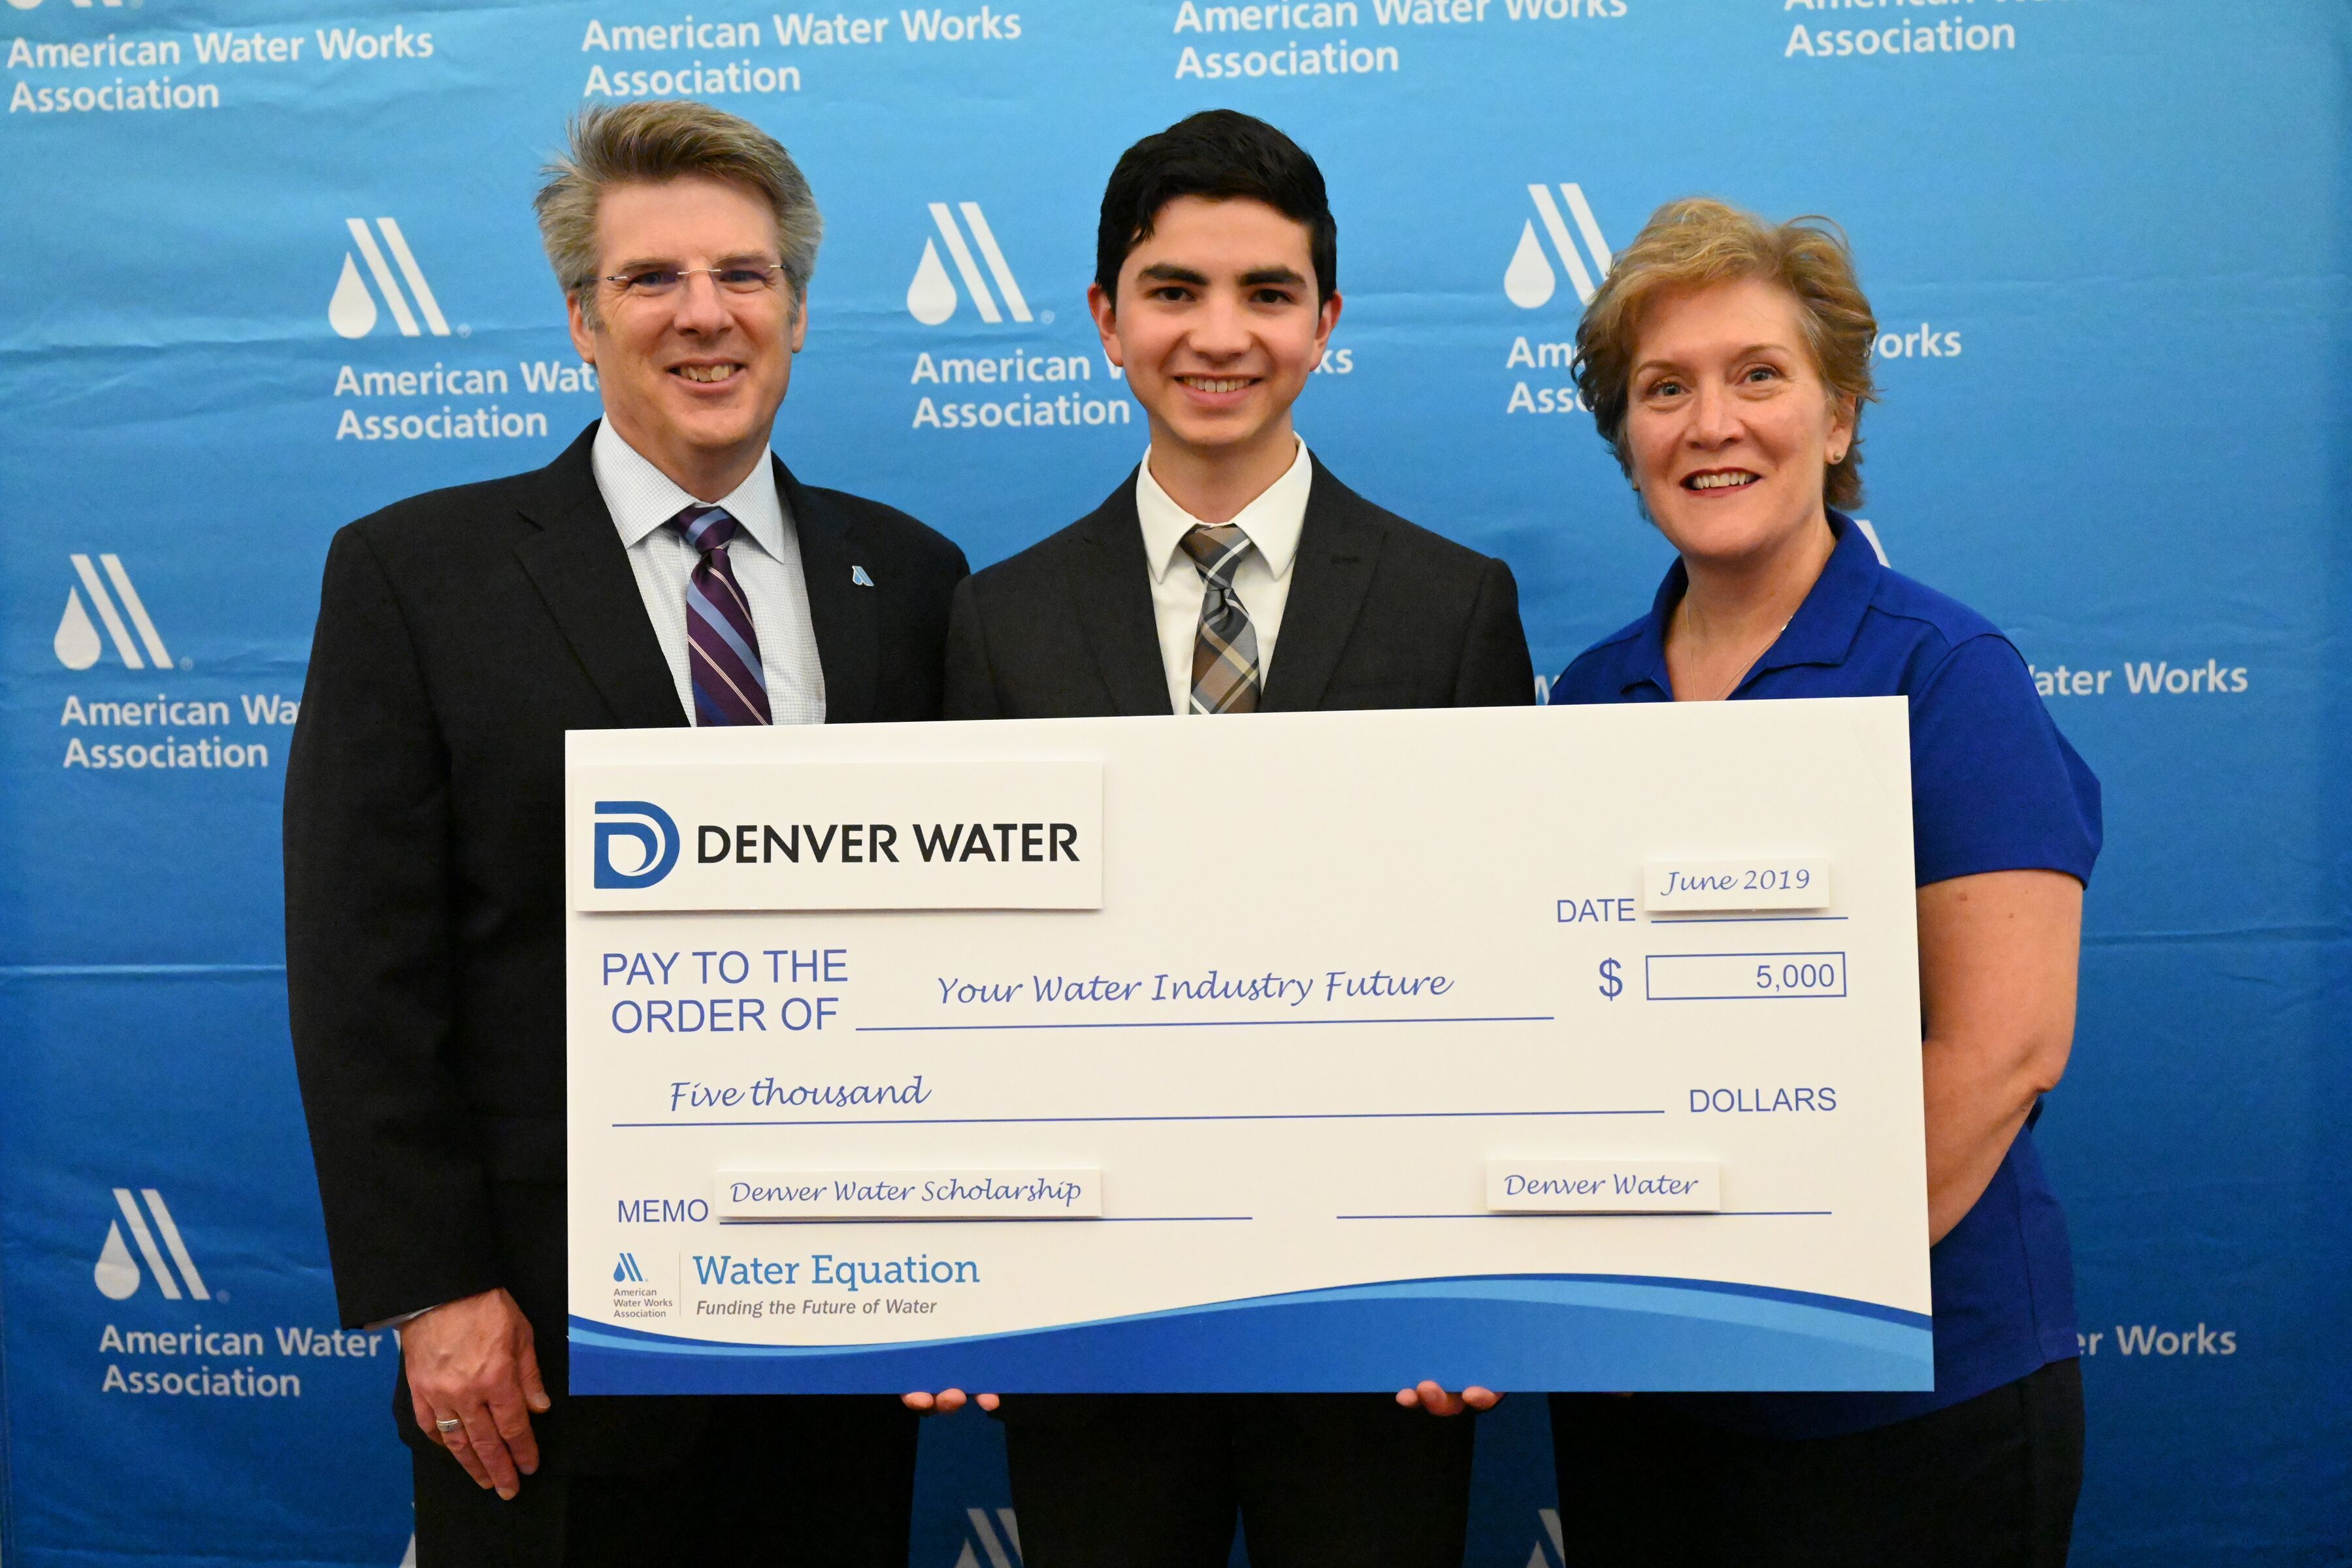 Three people stand holding a giant check for $5,000 made out to "Your Water Industry Future" from Denver Water.